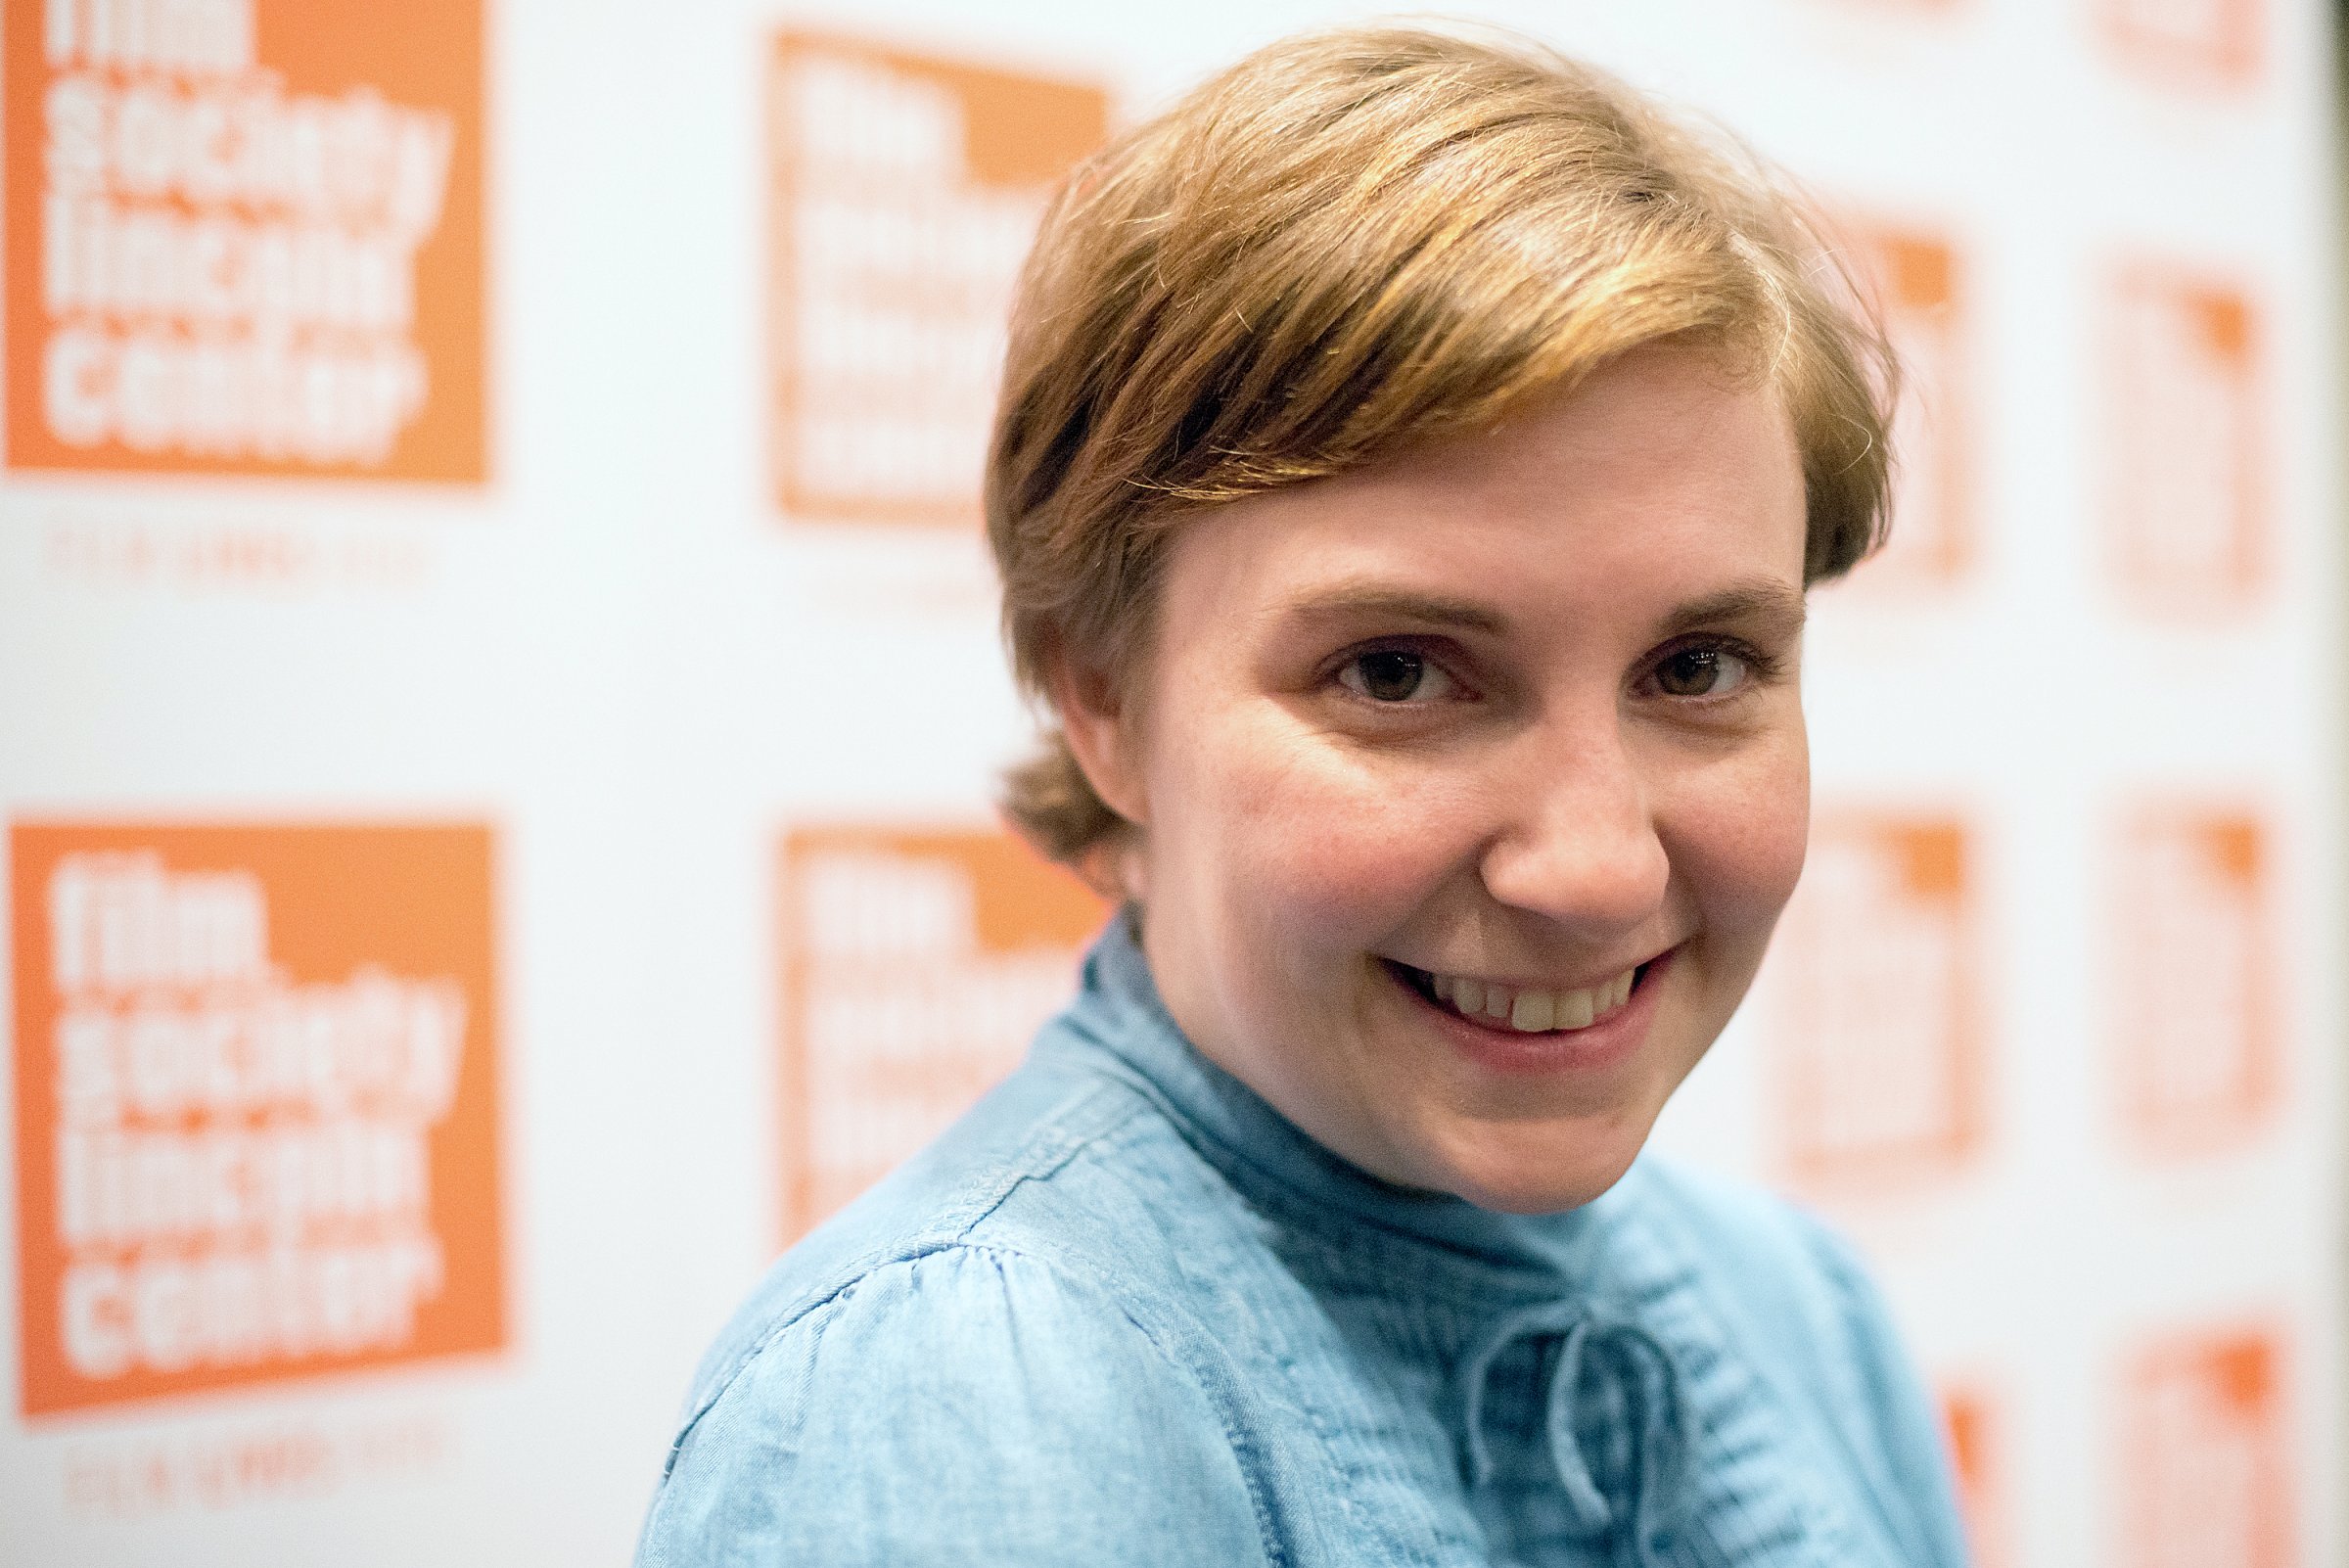 Lena Dunham at the 2015 Film Society of Lincoln Center Summer Talks with Judd Apatow and Lena Dunham in New York City on July 13, 2015.